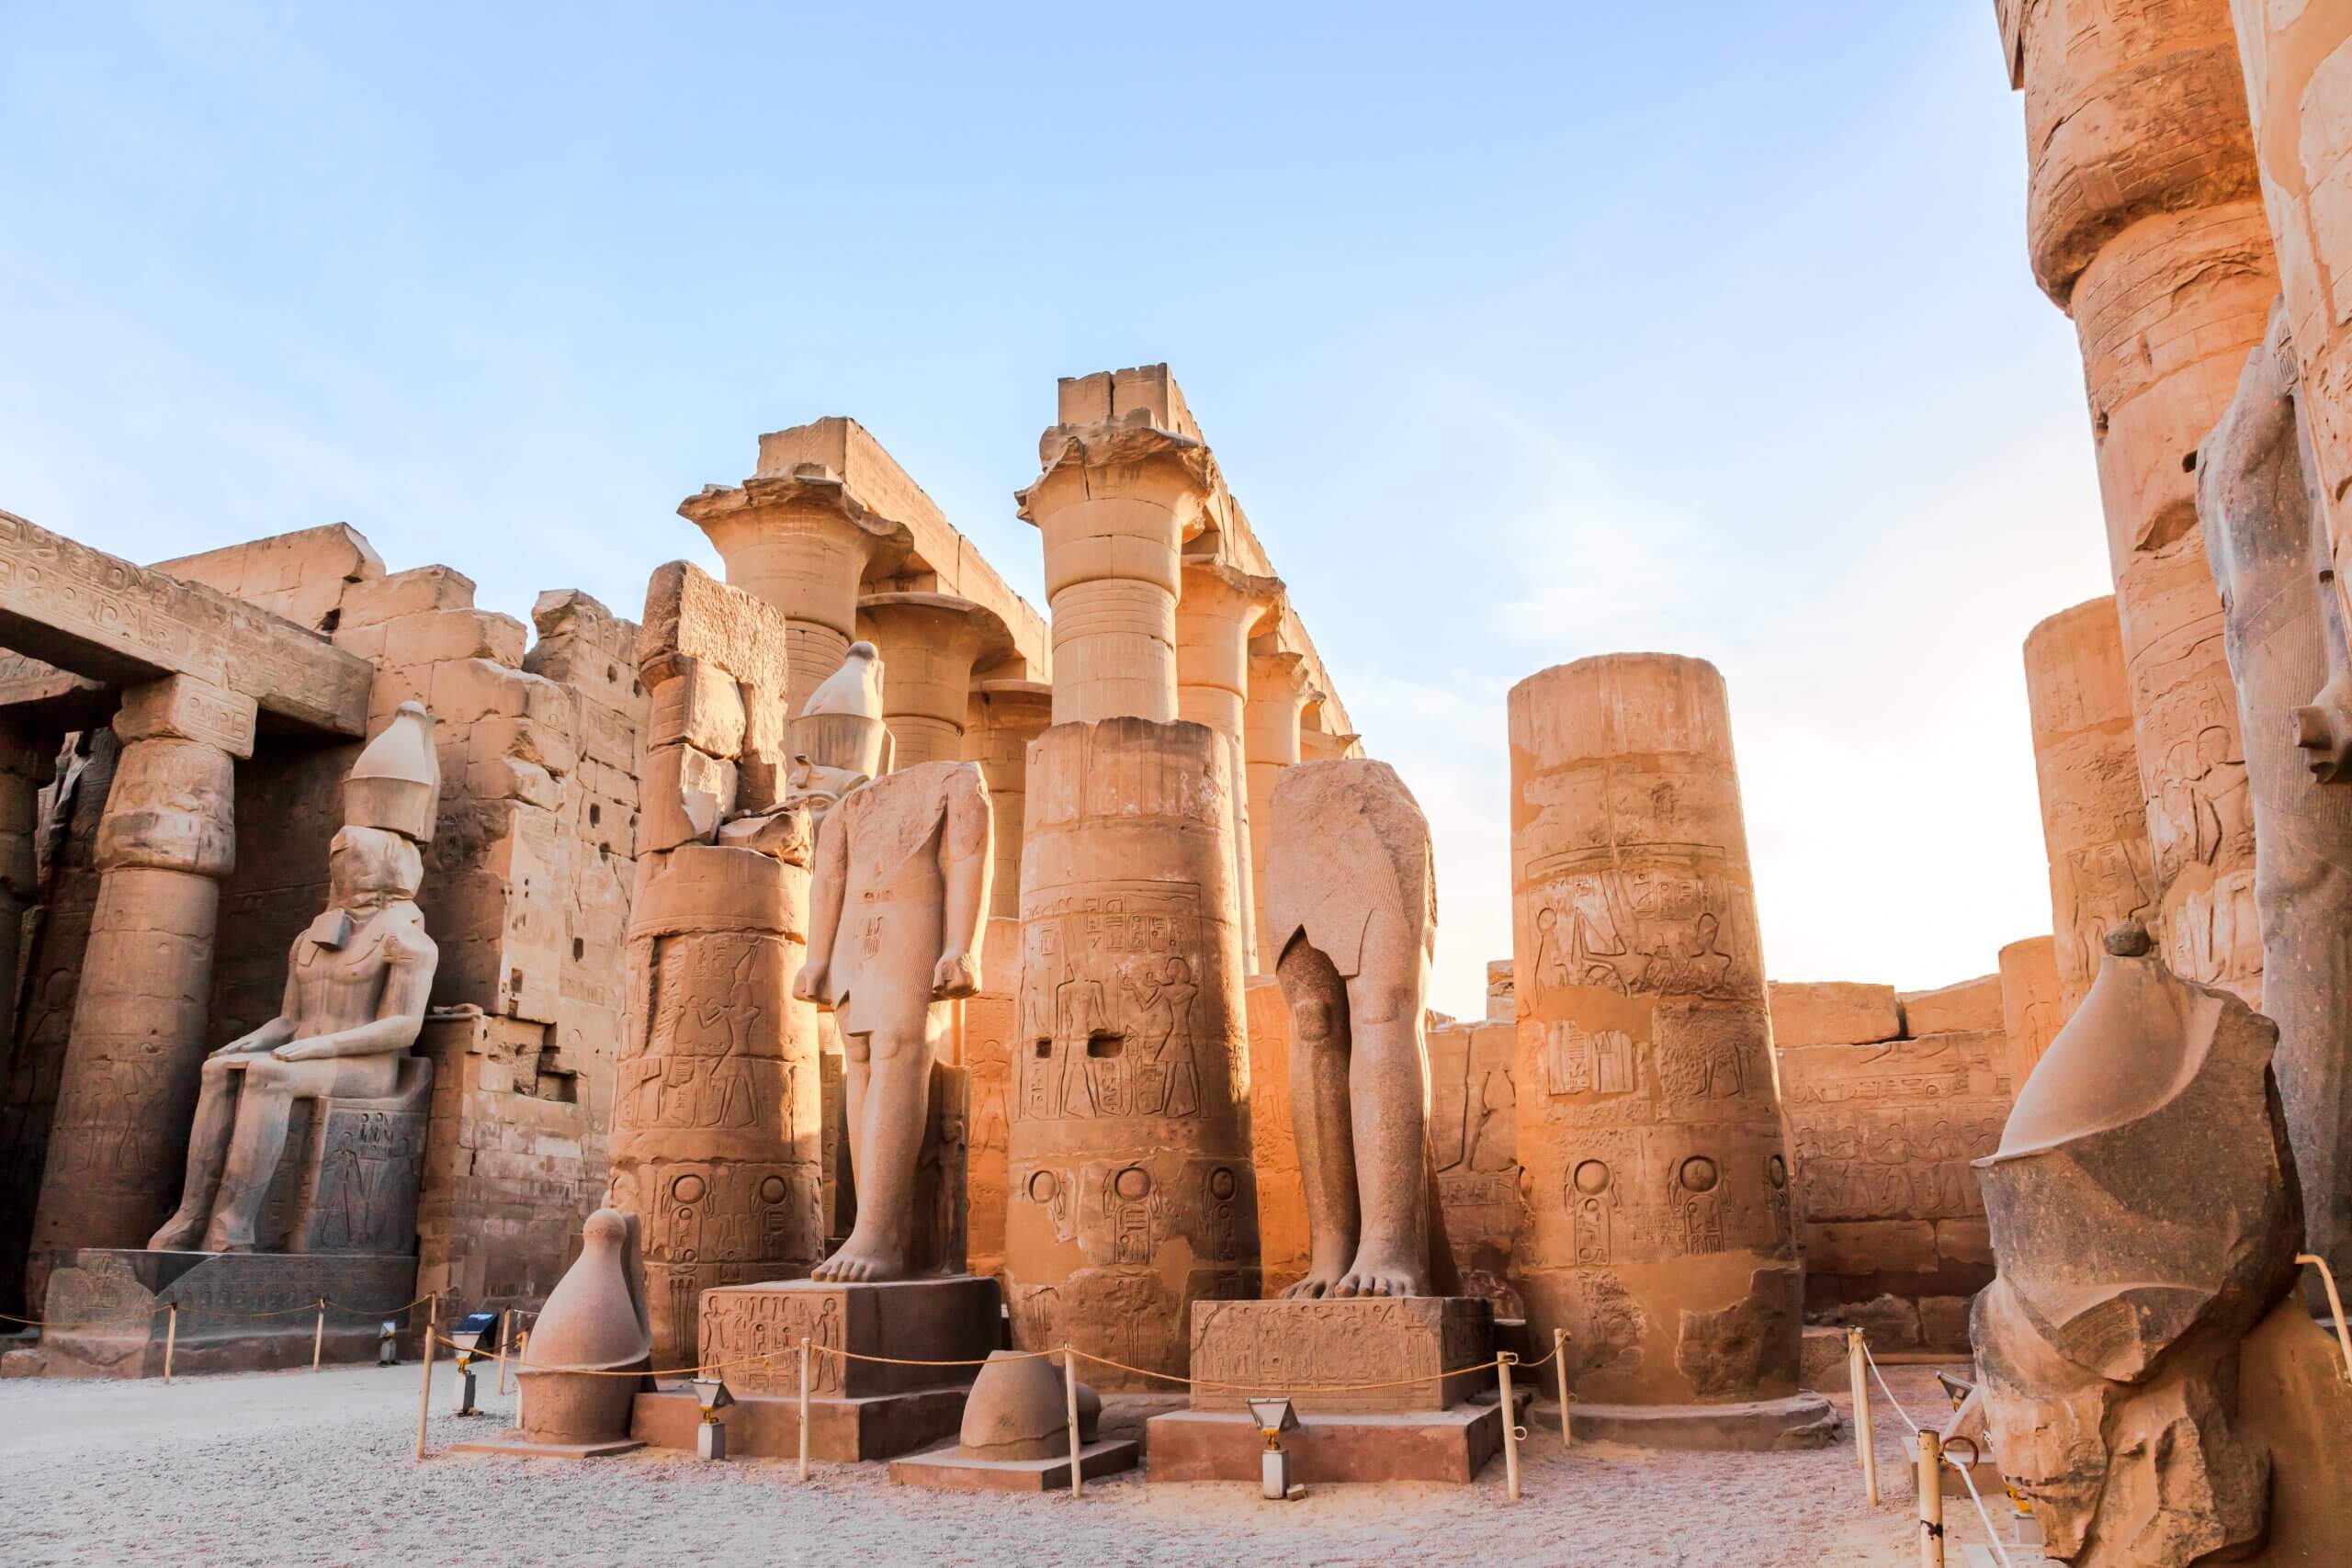 Cairo, cruise on the Nile to discover Luxor, Aswan from Abu Simbel, and finally Hurghada